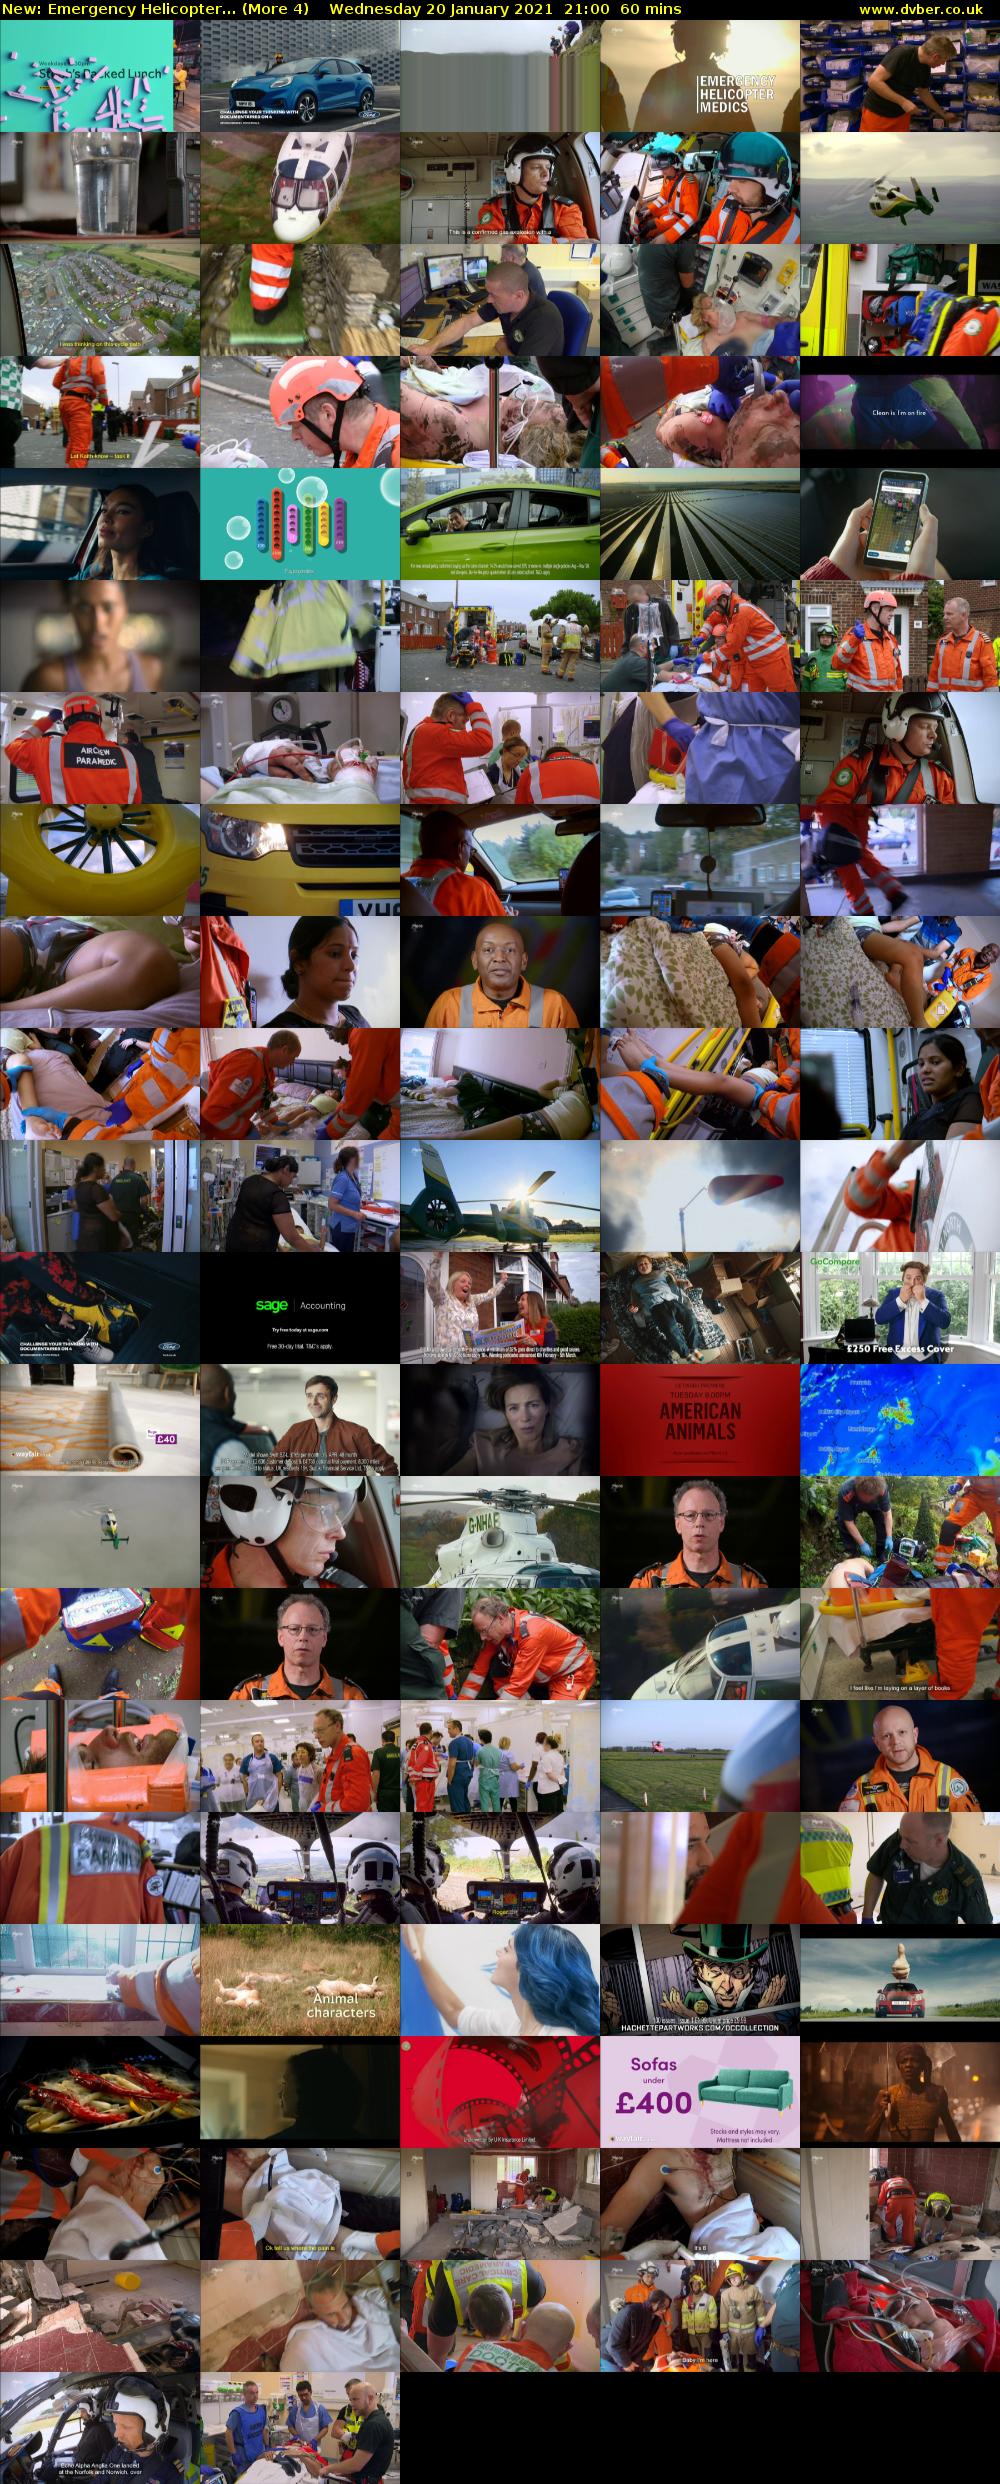 Emergency Helicopter... (More 4) Wednesday 20 January 2021 21:00 - 22:00